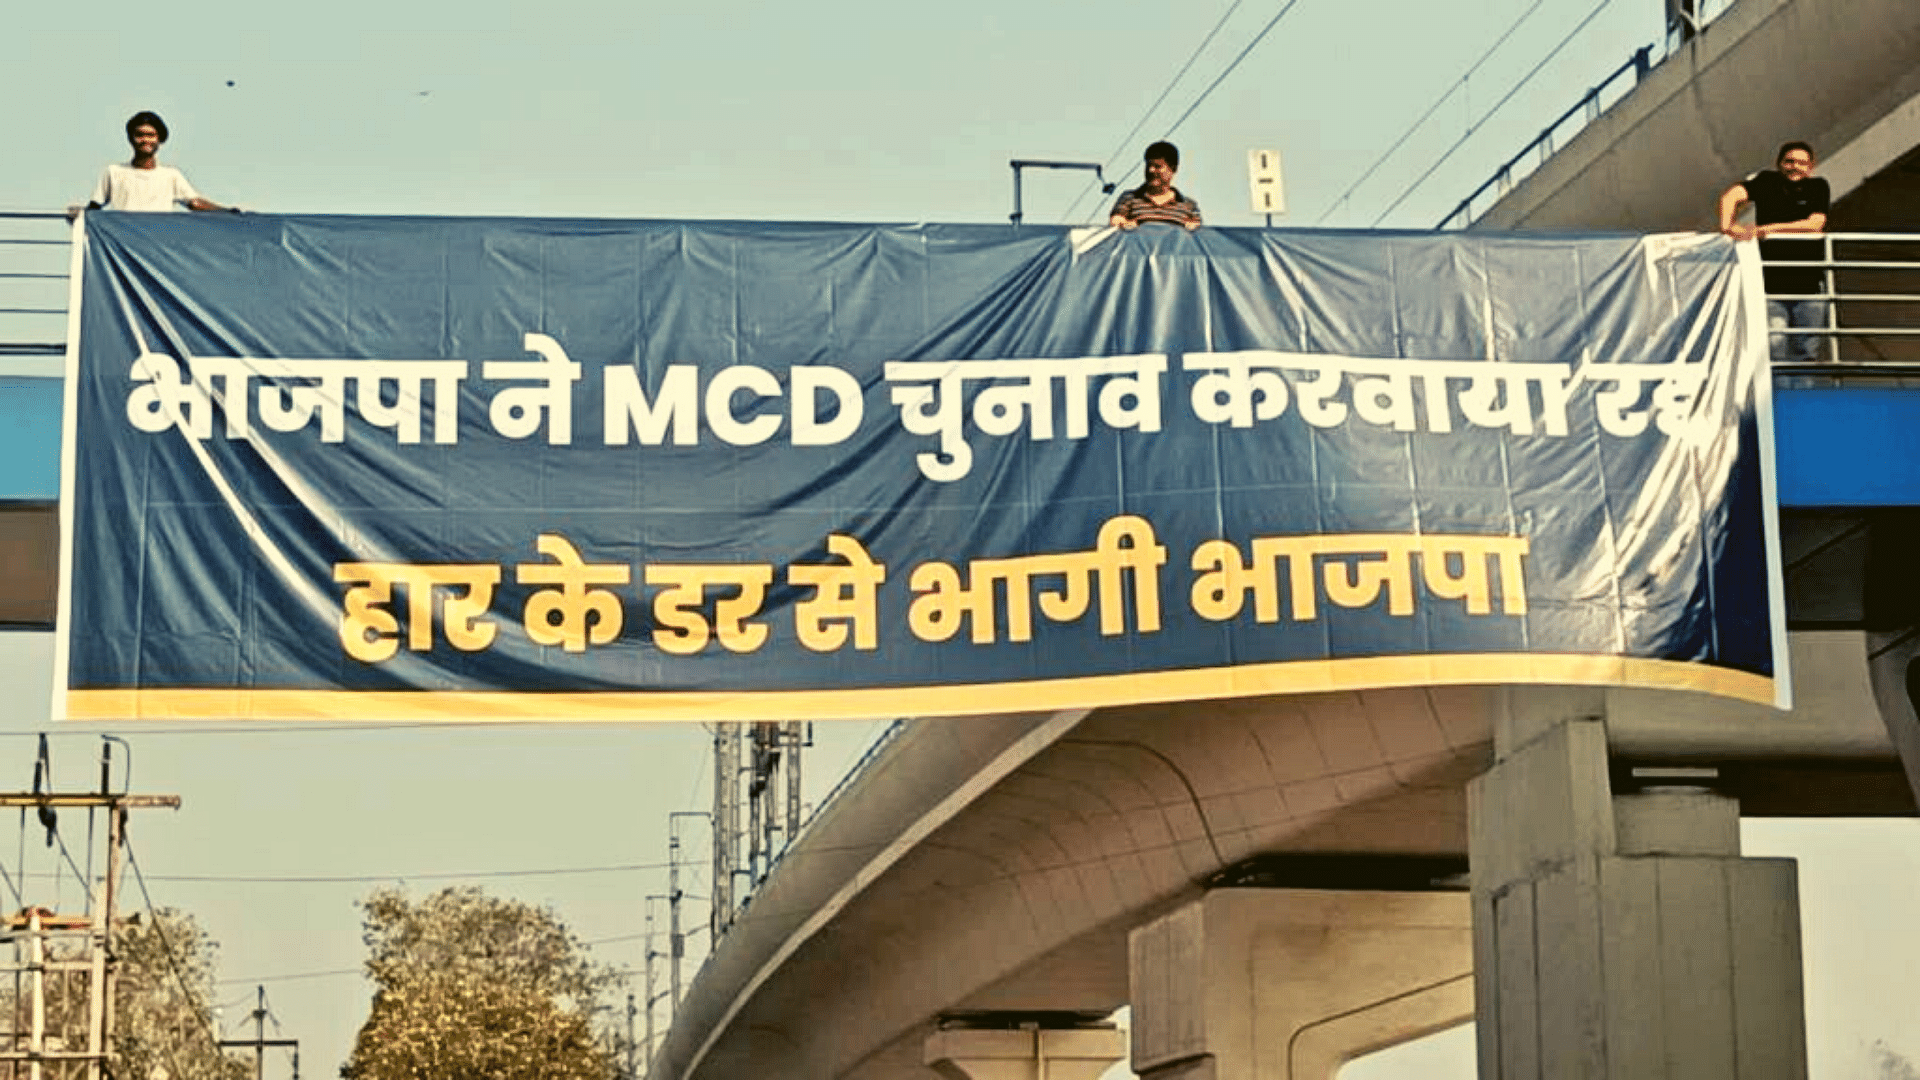 <div class="paragraphs"><p>After AAP moved the top court on Thursday, the party launched a 'human chain' campaign, with party workers unfurling banners from flyovers of Delhi which read - '<em>BJP ne MCD chunaav karvaya radd haar ke darr se bhaagi BJP</em>' (BJP got MCD elections postponed and ran away fearing defeat).</p></div>